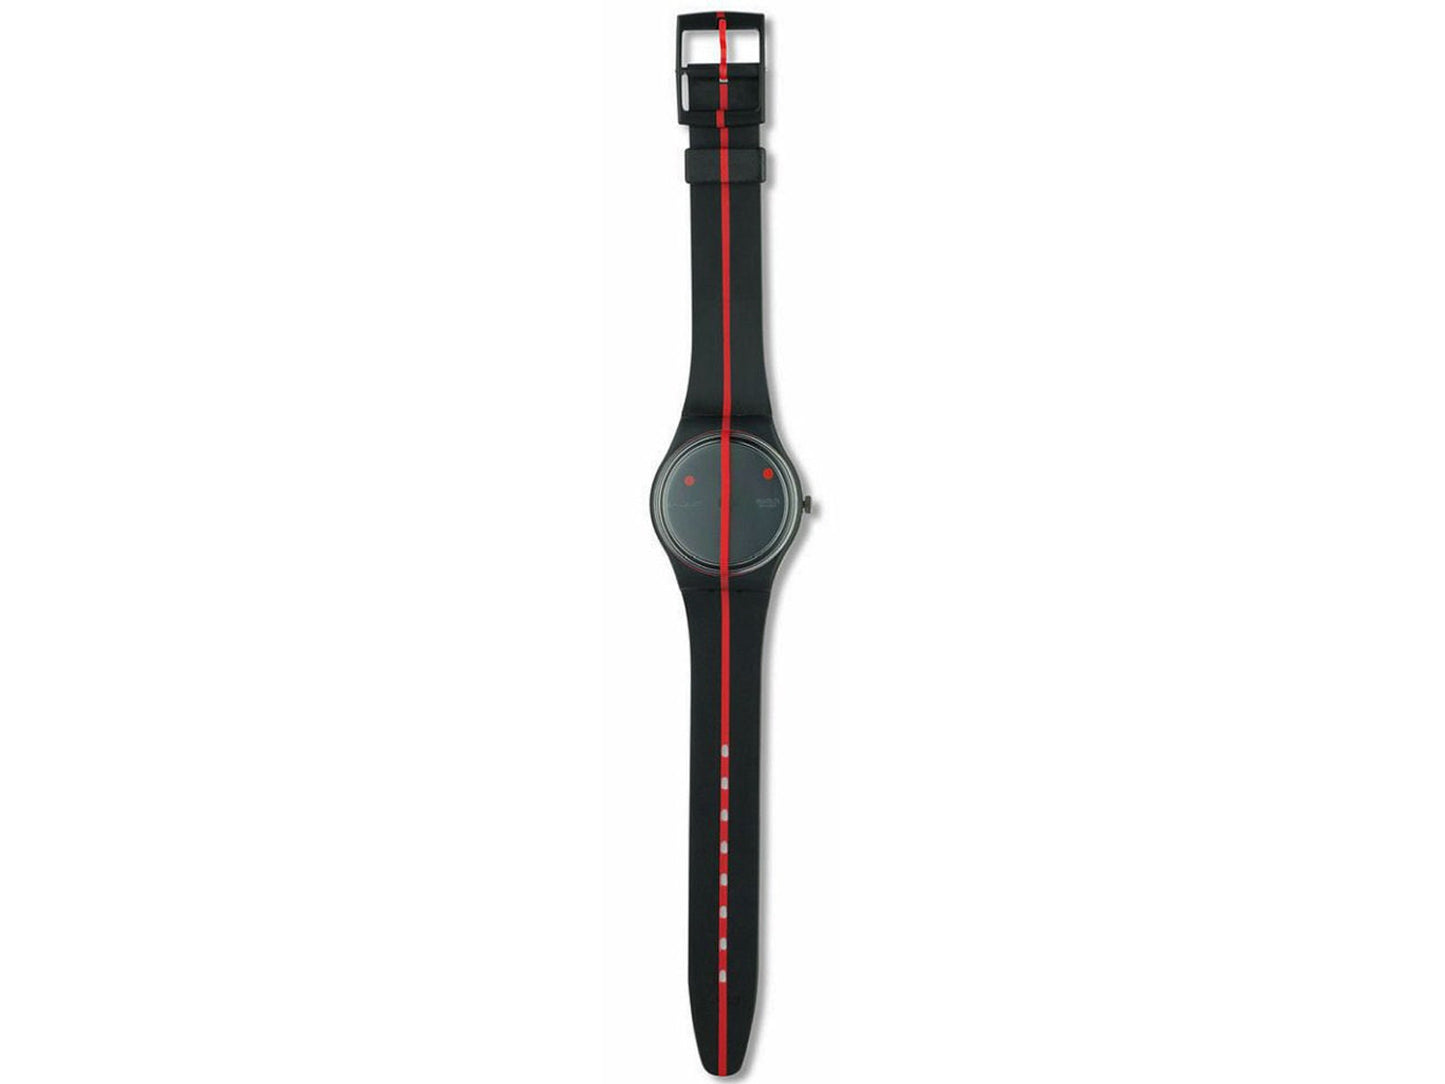 Swatch ROSSO SUR BLACKOUT / Gent (GZ119) / Swiss Art - Numbered Edition - New Old Stock - with Original Box